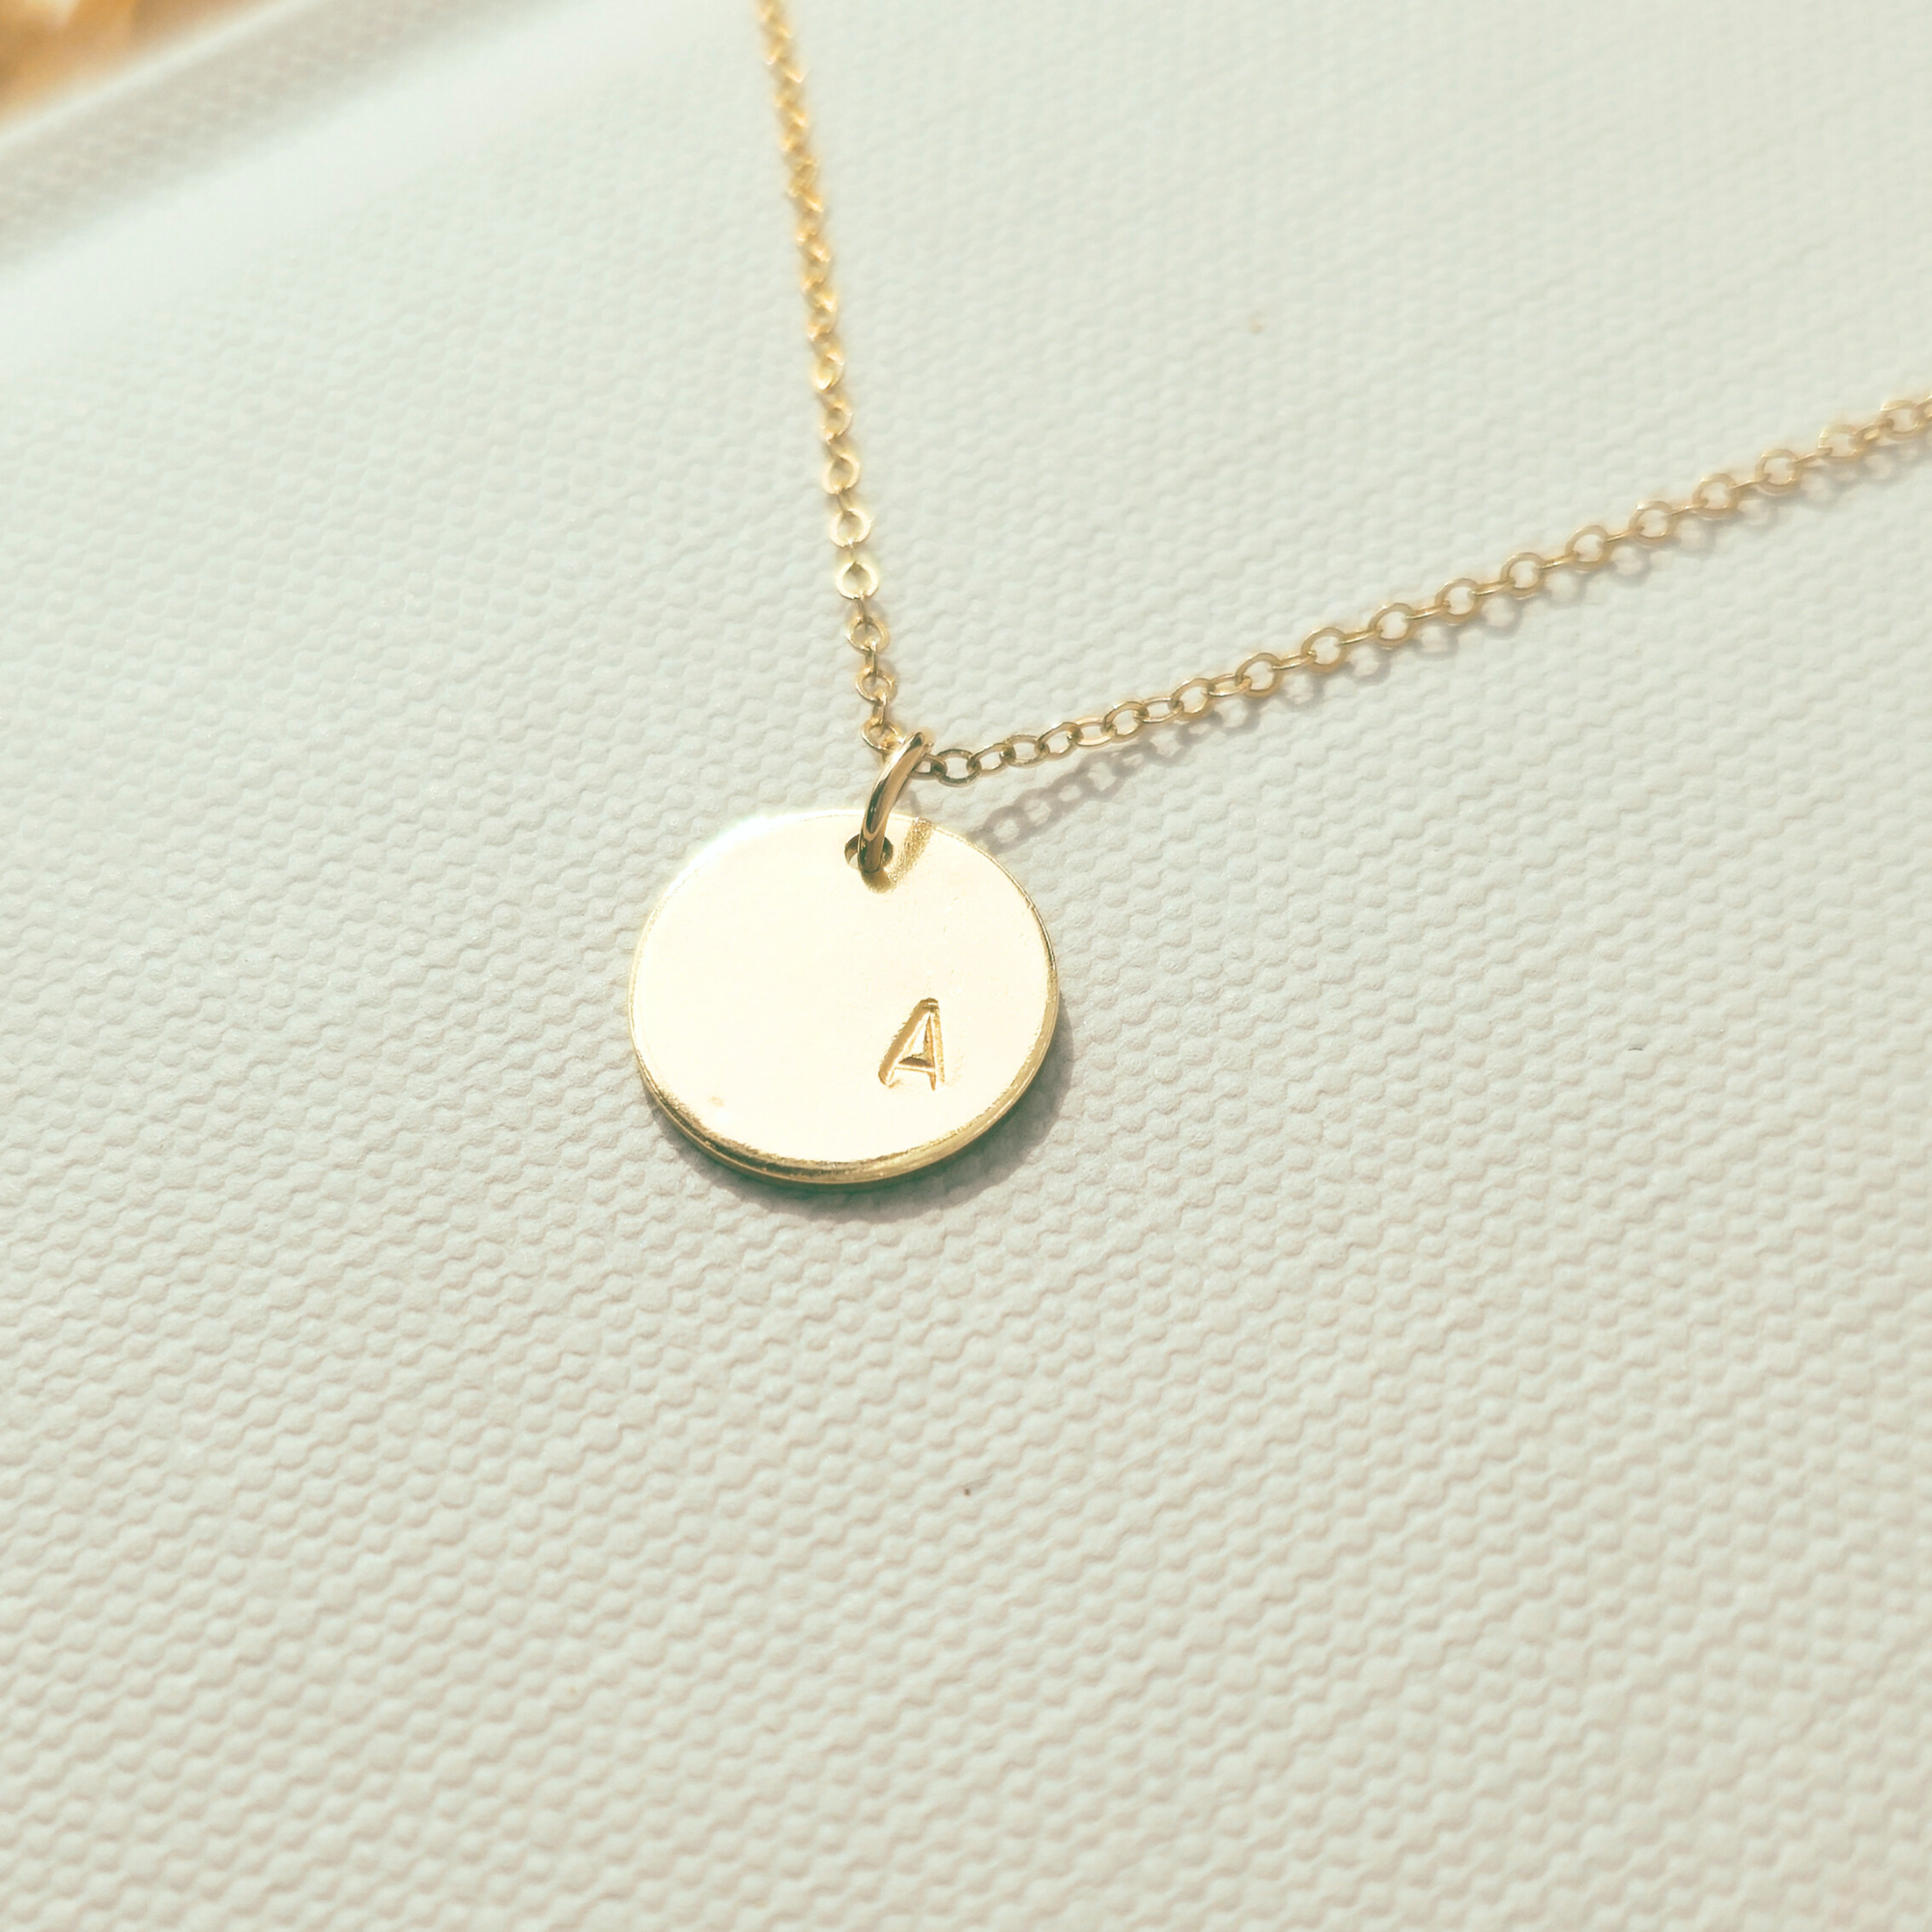 Amazon.com: Elegant 14K Gold Diamond Letter Disk Necklace - Personalized  Dainty Charm Pendant - Custom Initial Jewelry - Gift for Her : Handmade  Products